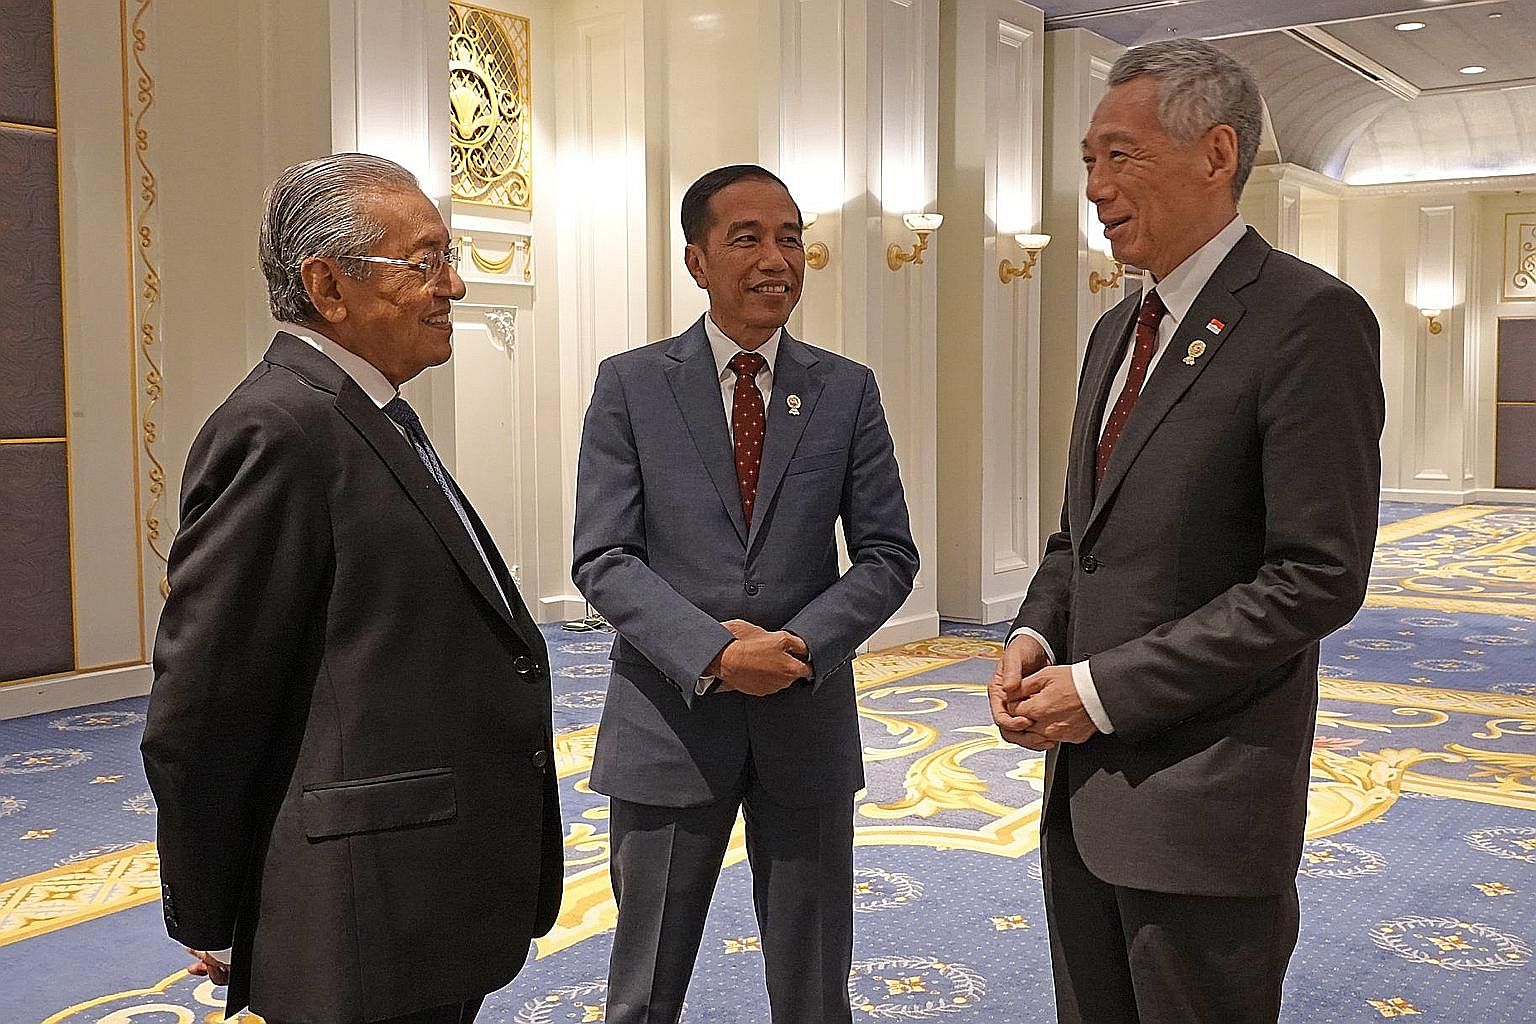 President Joko Widodo with Prime Minister Lee Hsien Loong and Malaysian Prime Minister Mahathir Mohamad in Bangkok last month. ST editors hailed Mr Joko's role in putting Indonesia at the heart of Asean in recent times.